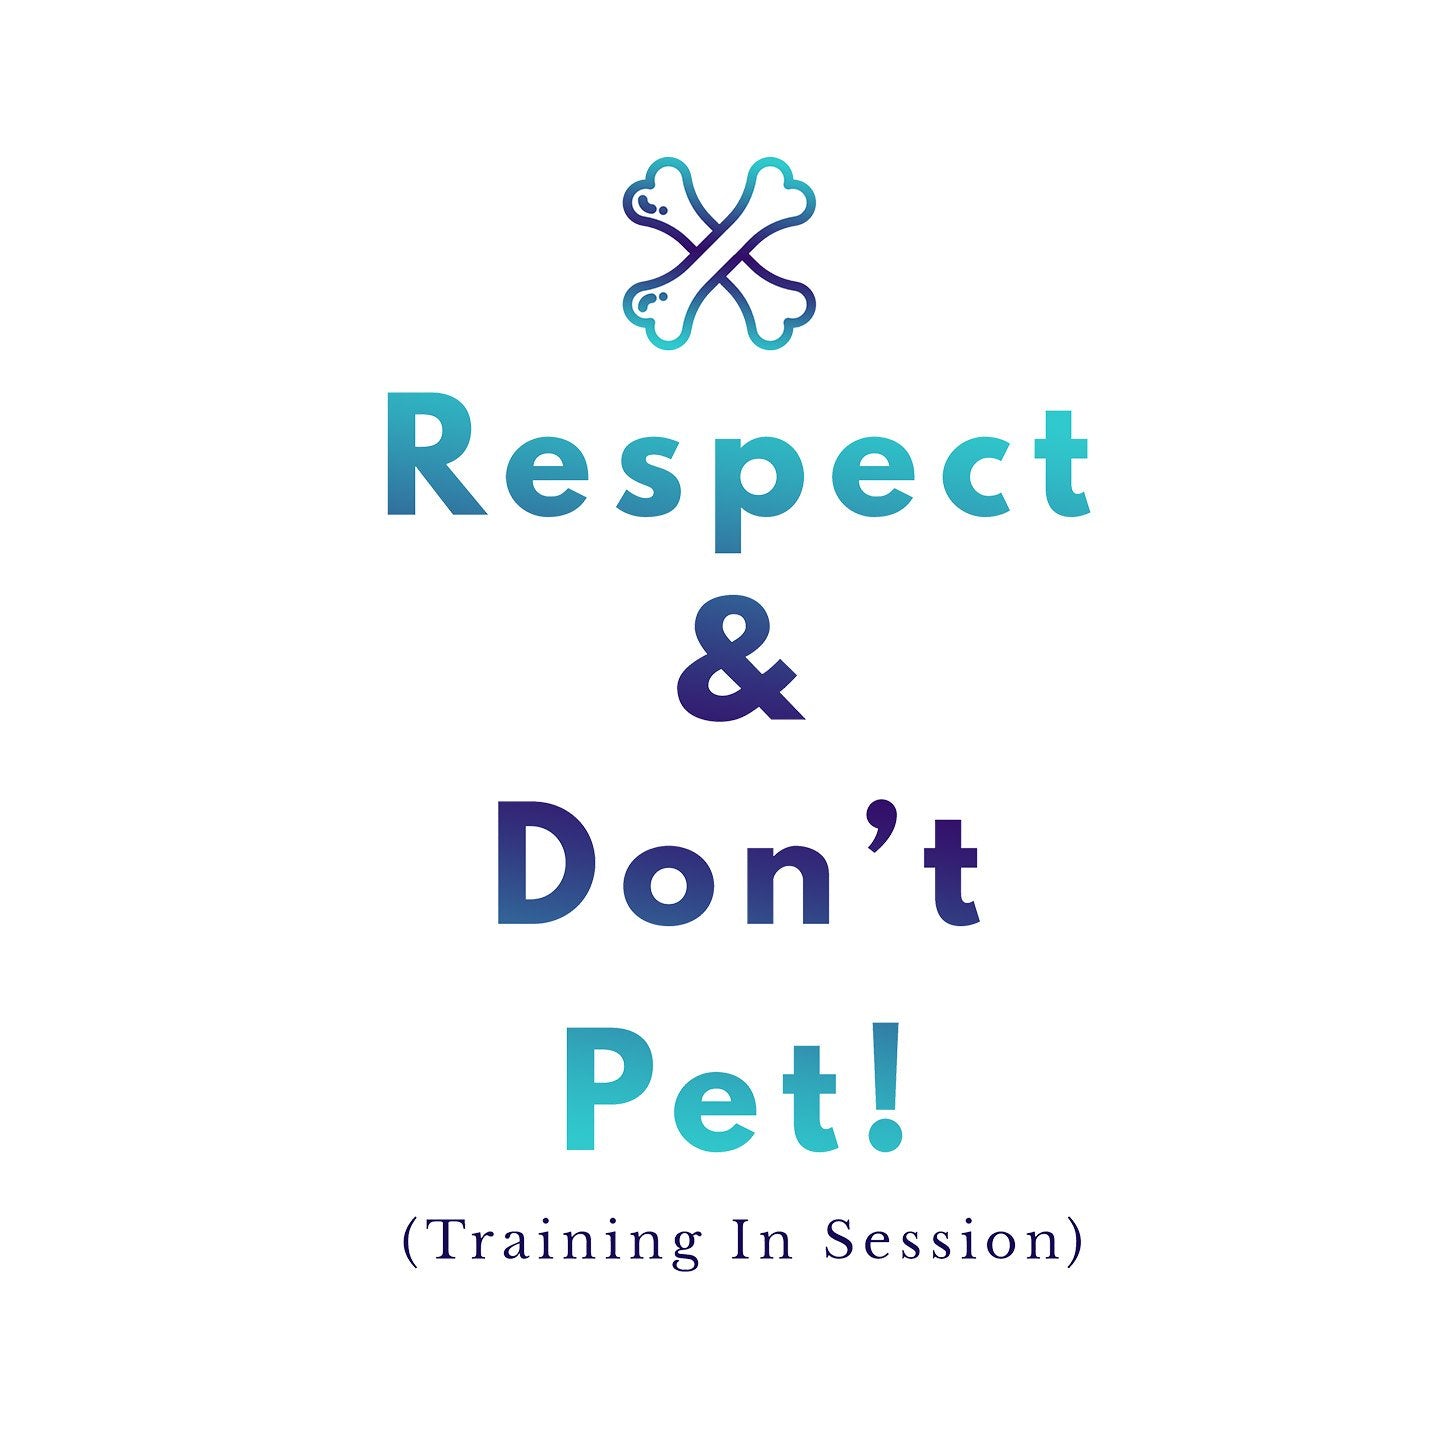 Service Dog Training Respect and Don't Pet - Women's V-Neck T-Shirt